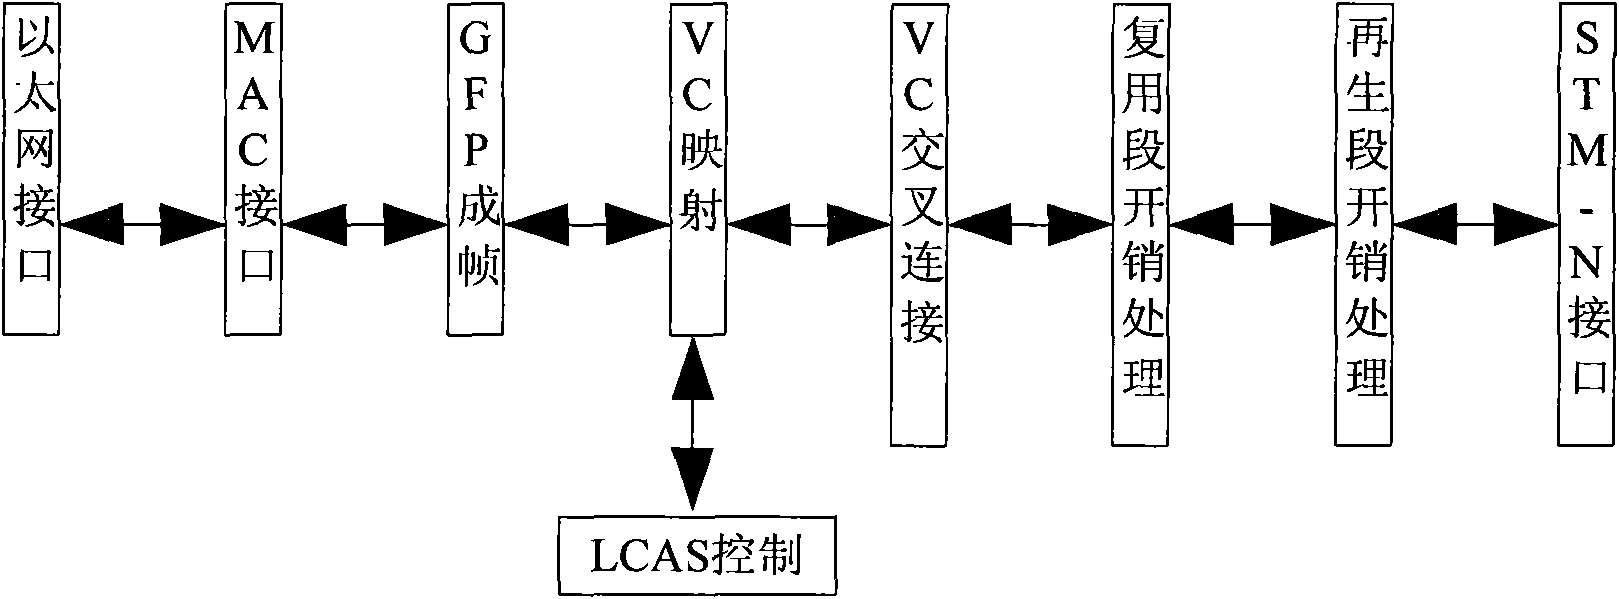 EOS tester of integrated LCAS simulation and VCG time delay simulation